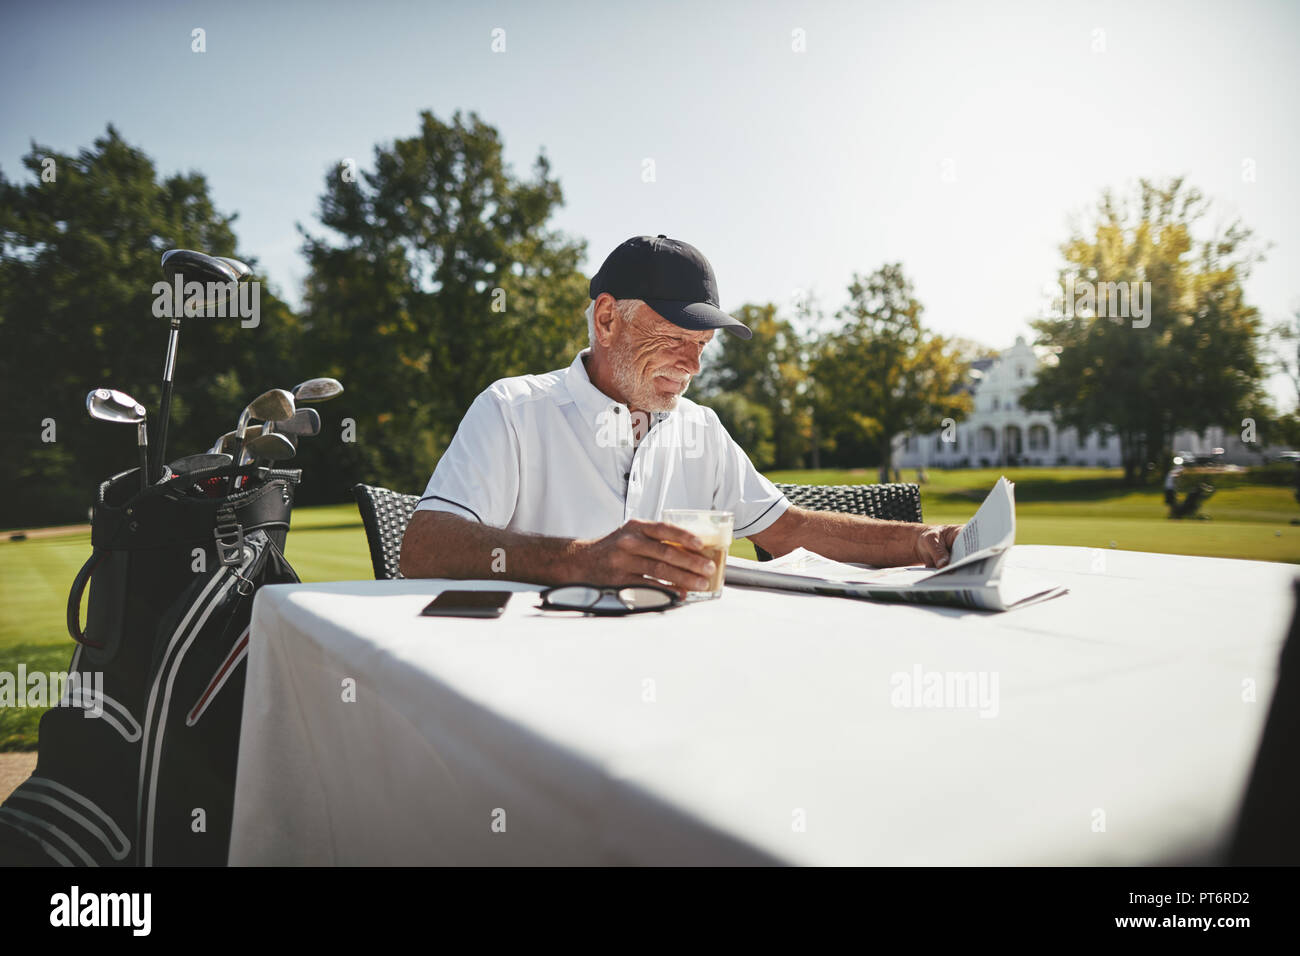 Smiling senior man enjoying a coffee and reading a newspaper while relaxing at a course restaurant after playing a round of golf Stock Photo